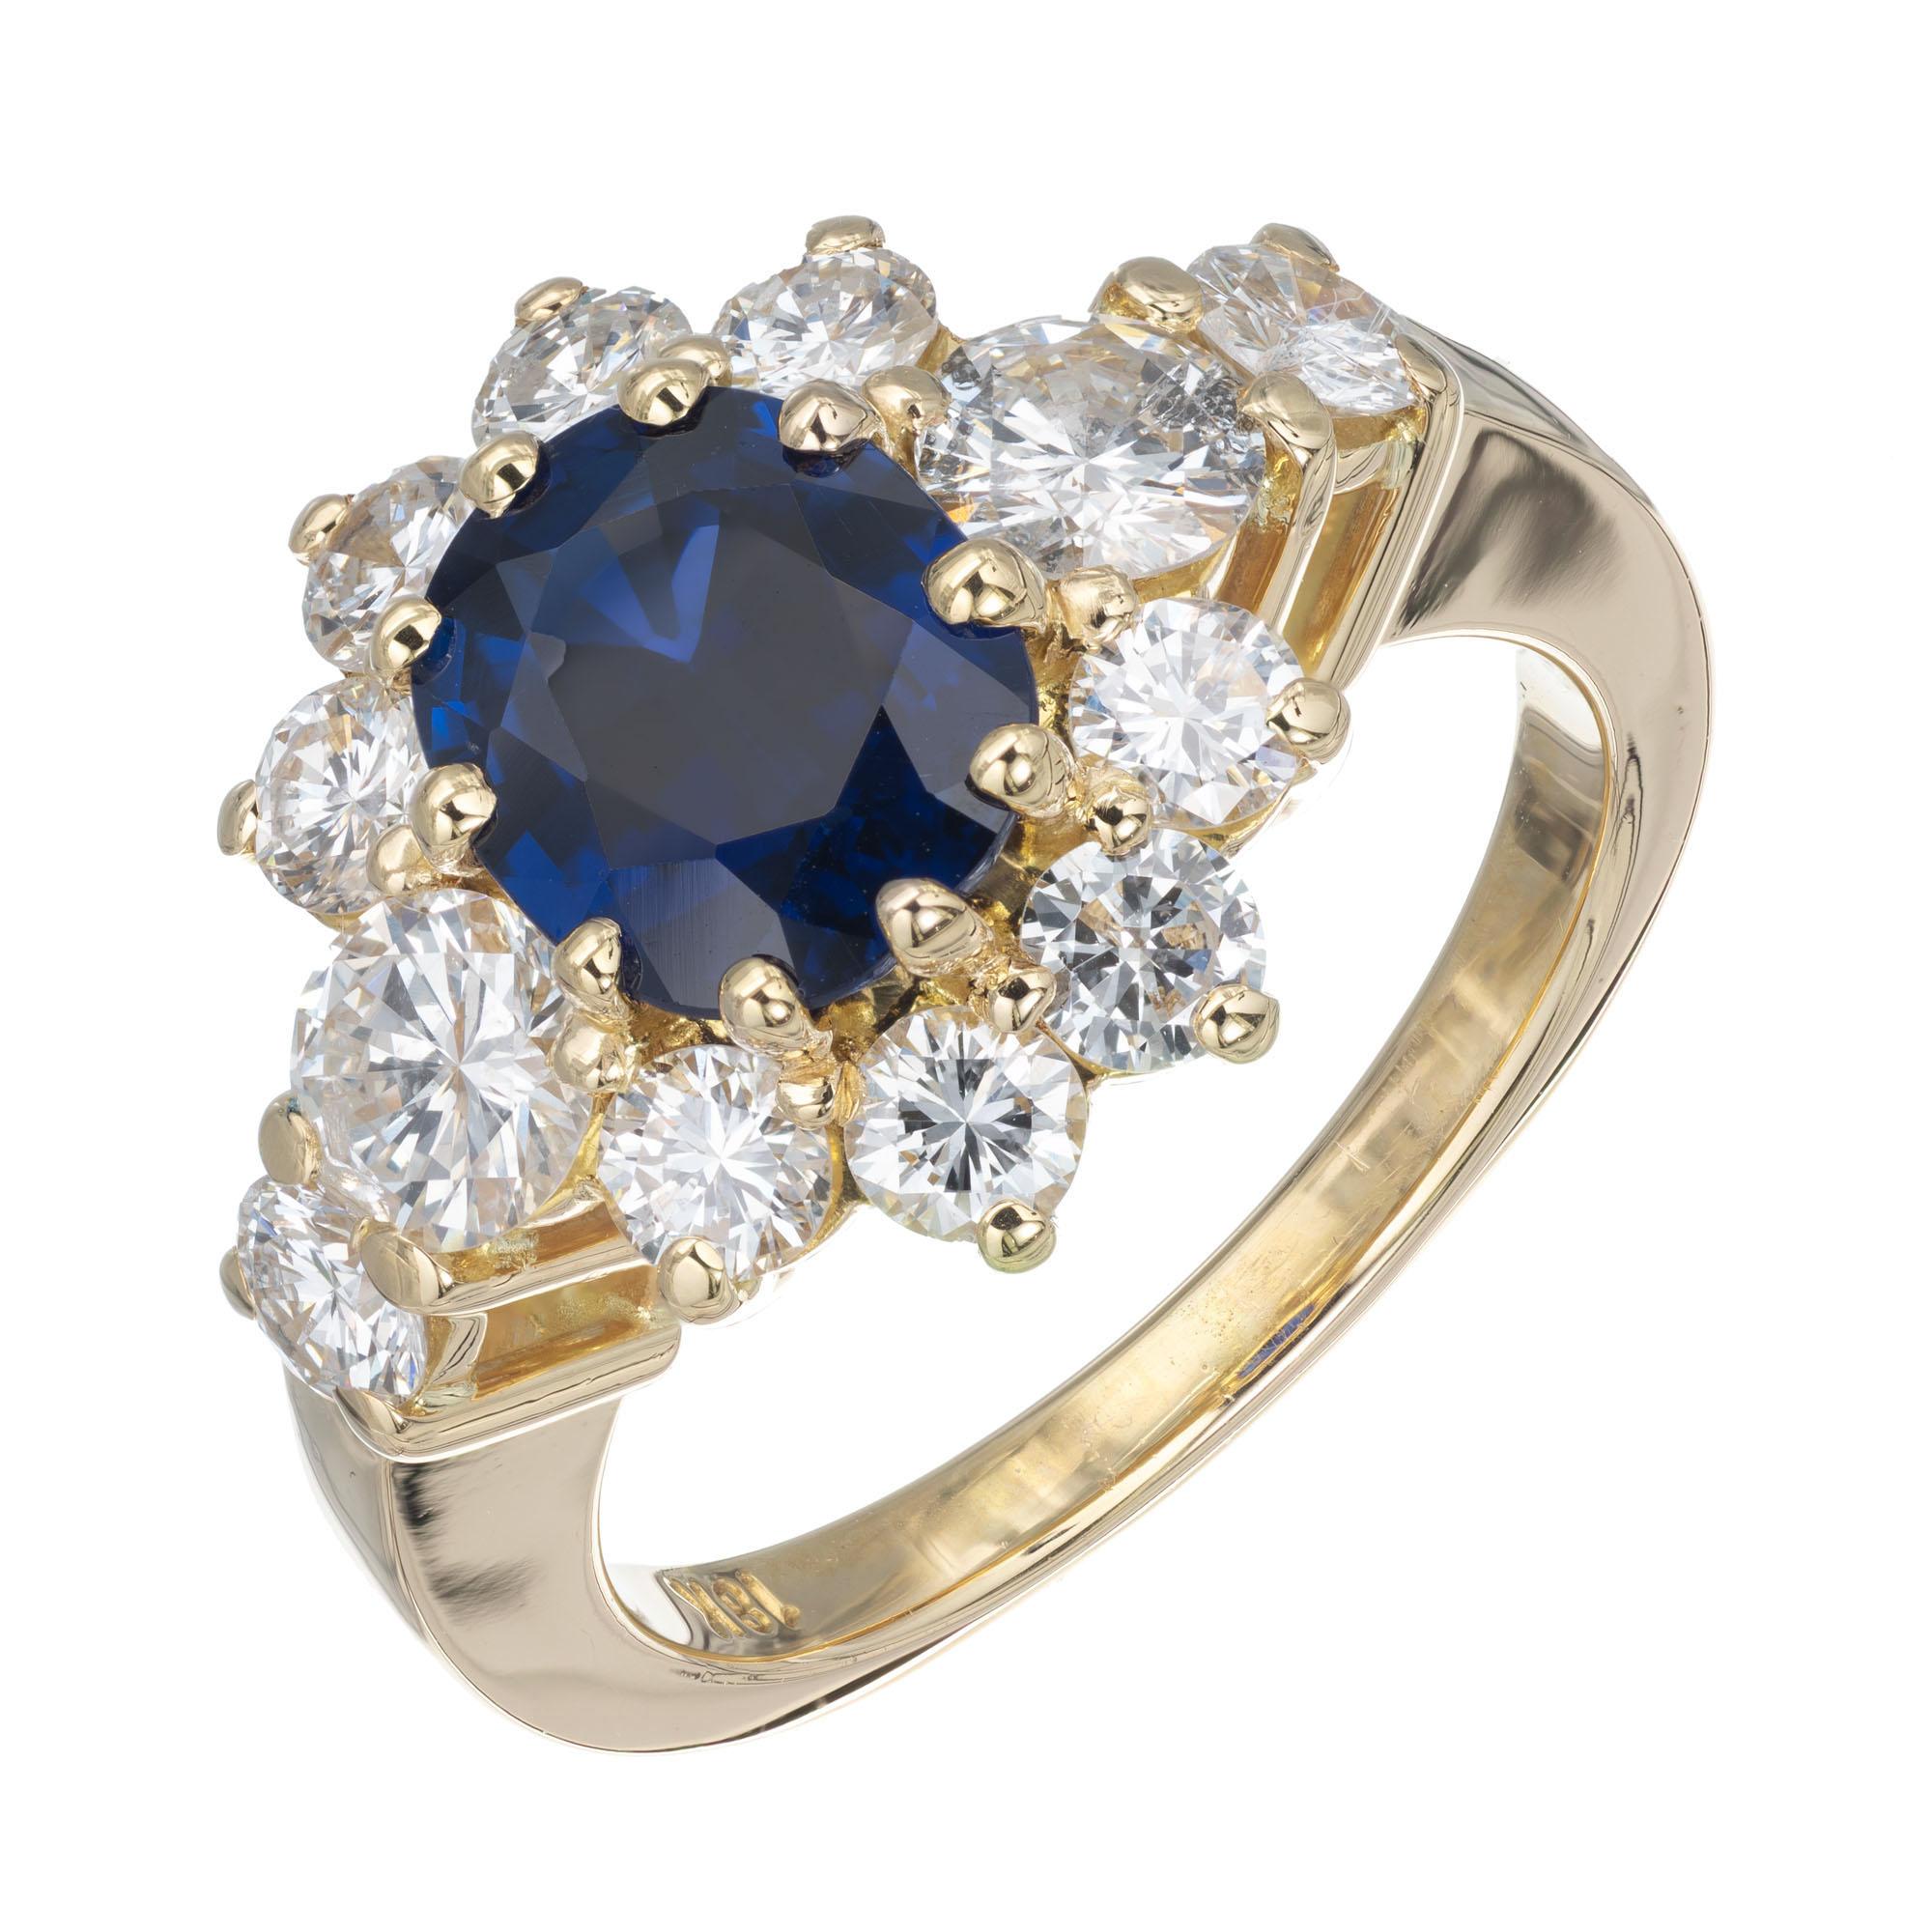 Royal blue 1.69 carat oval sapphire and diamond engagement ring. GIA Certified natural no heat no enhancements center stone, with a halo of round brilliant cut diamonds. 18k yellow gold setting. 

1 oval dark blue sapphire VS, approx. 1.69cts GIA